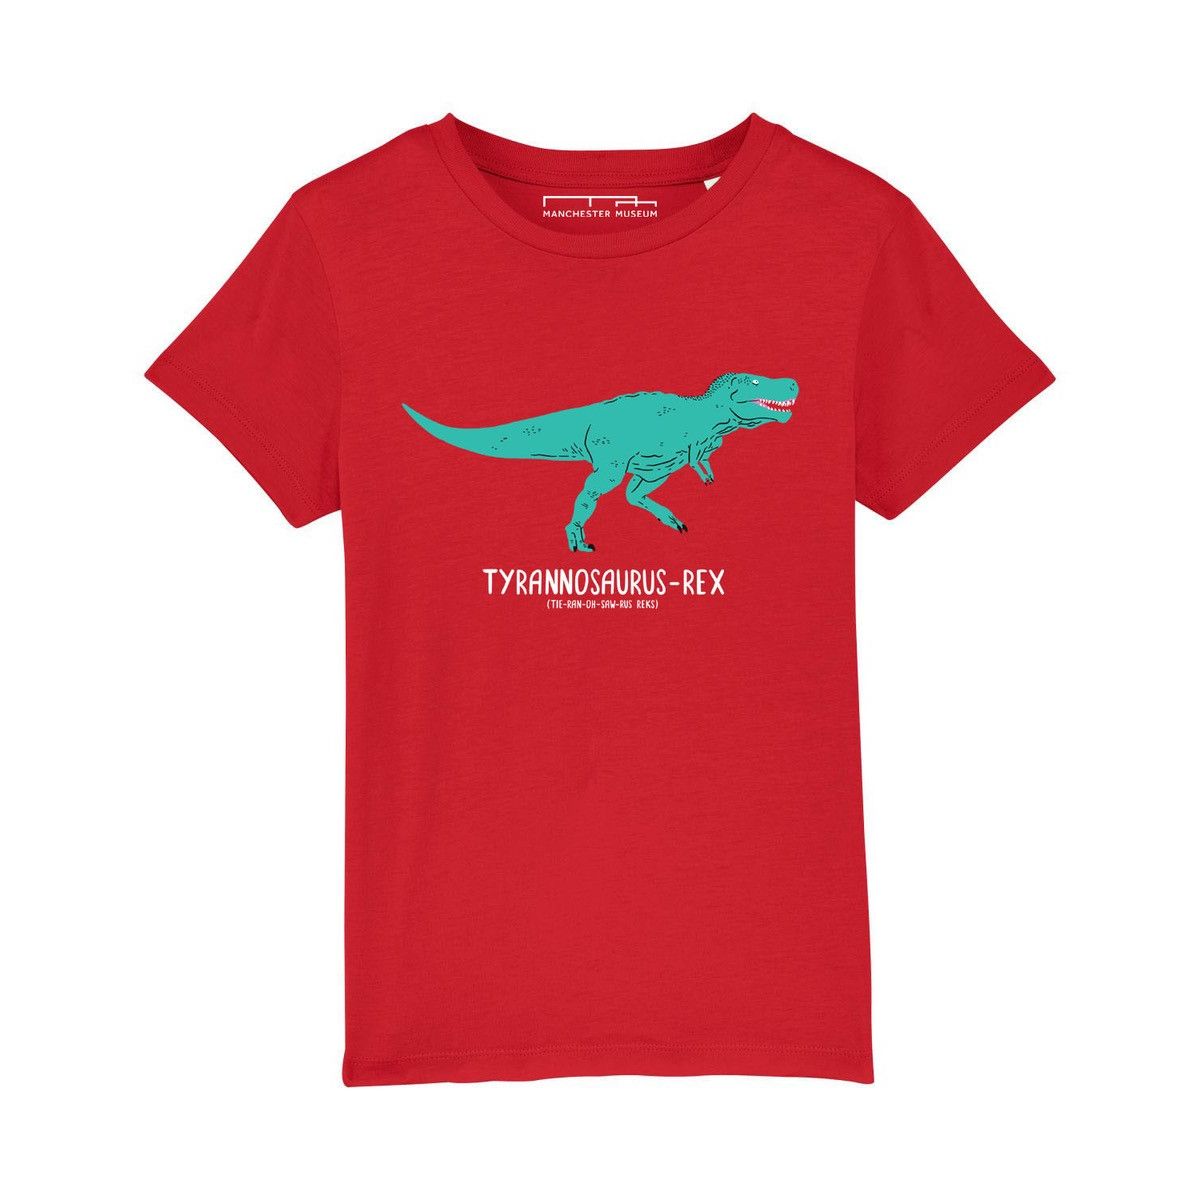 Red t shirt with a turquoise t-rex illustration on the chest.